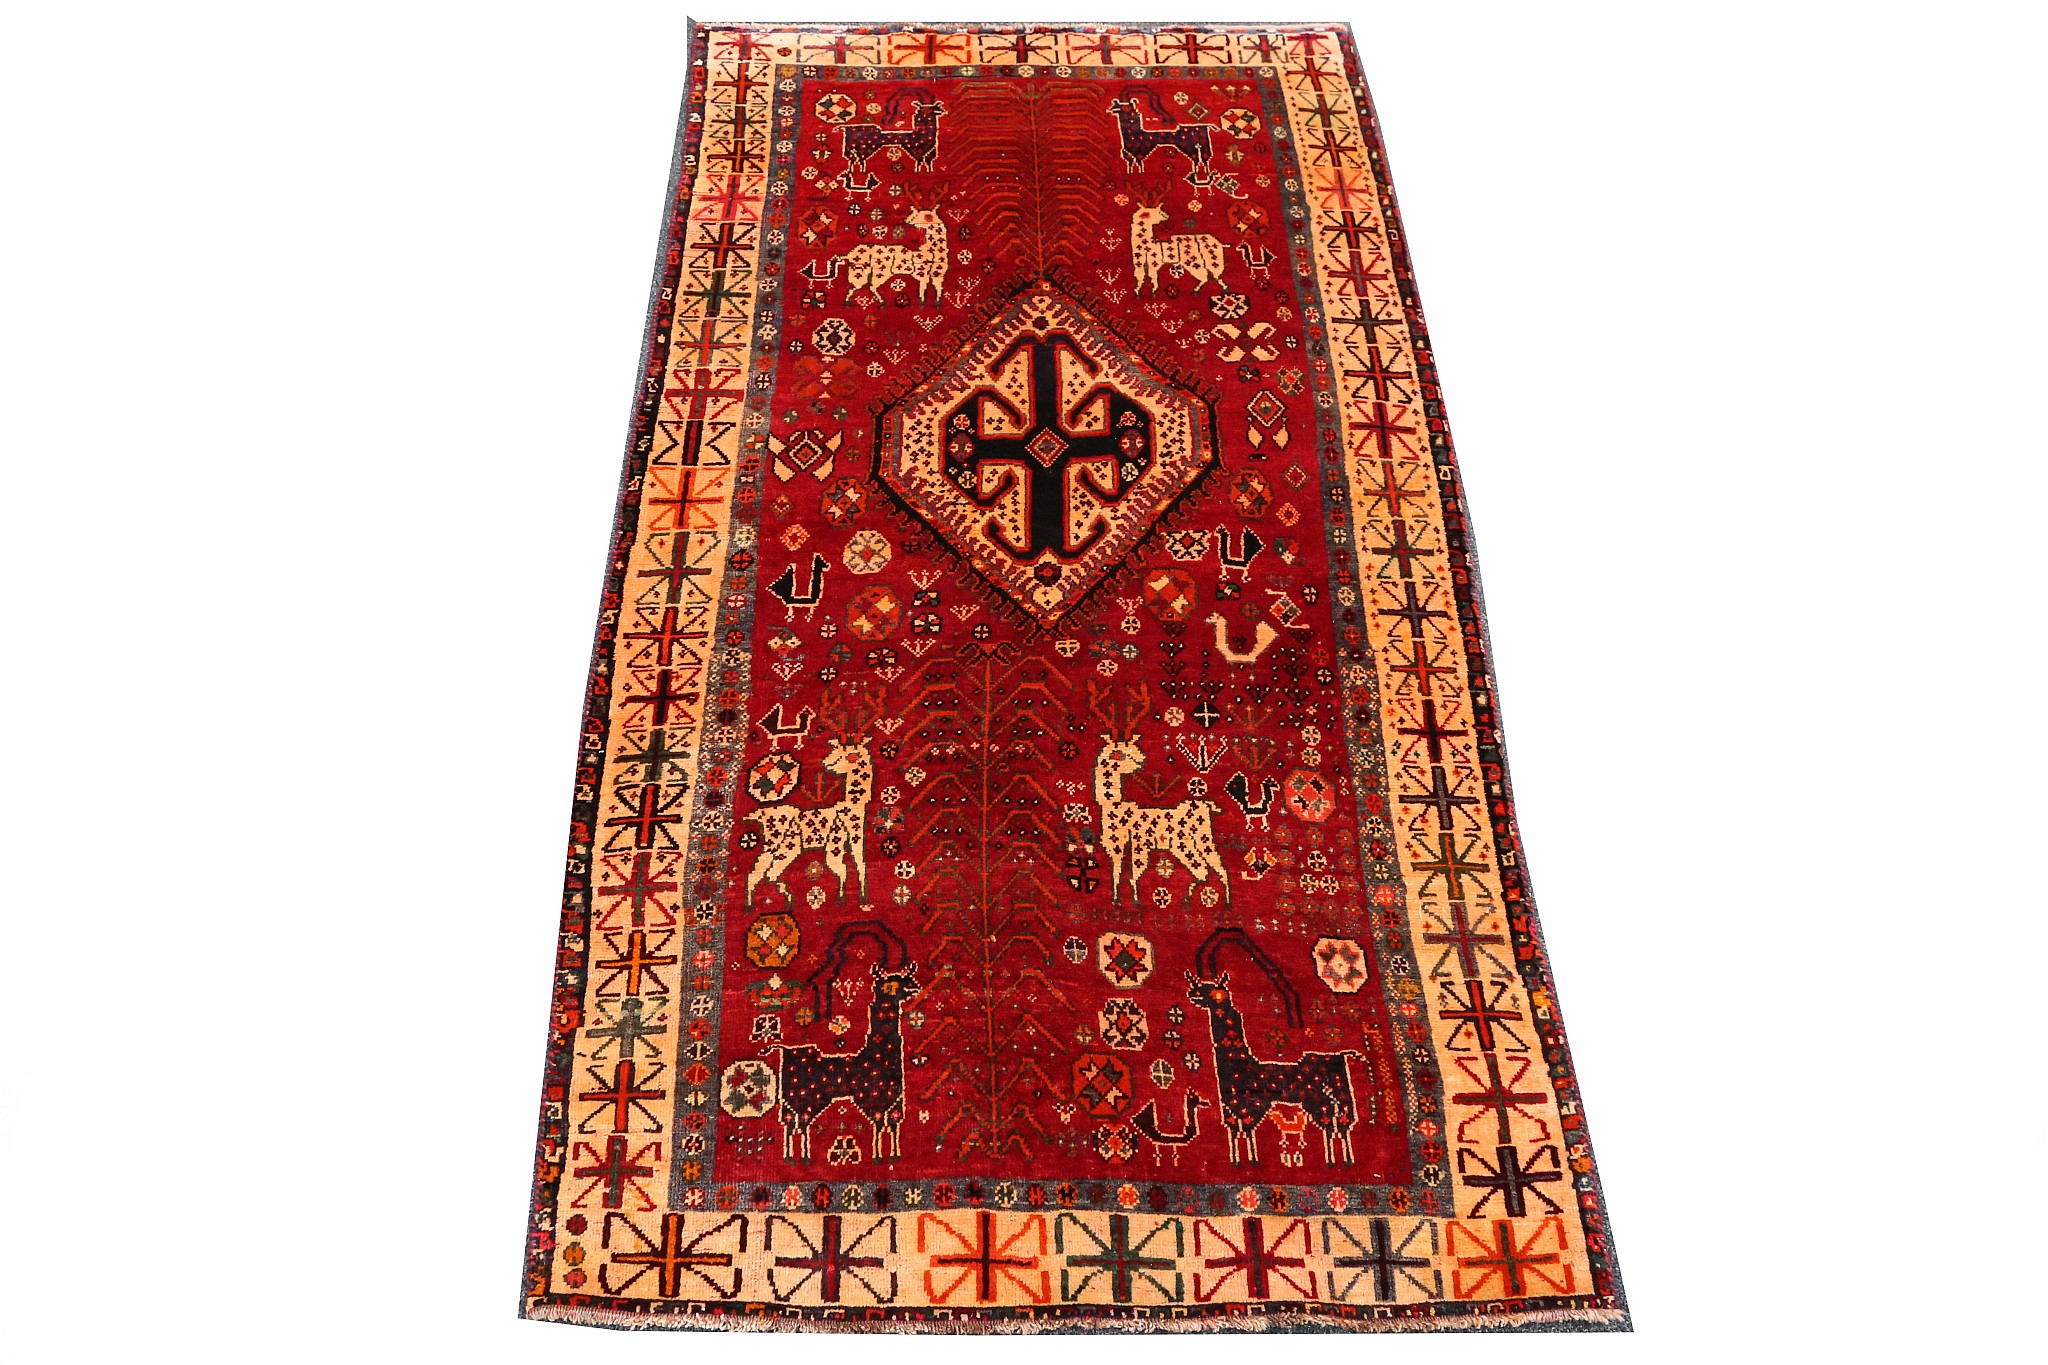 WITHDRAWN! Persian Qashqai rug, mid 20th century, South West Iran, 2.37m x 1.30m. Condition rating